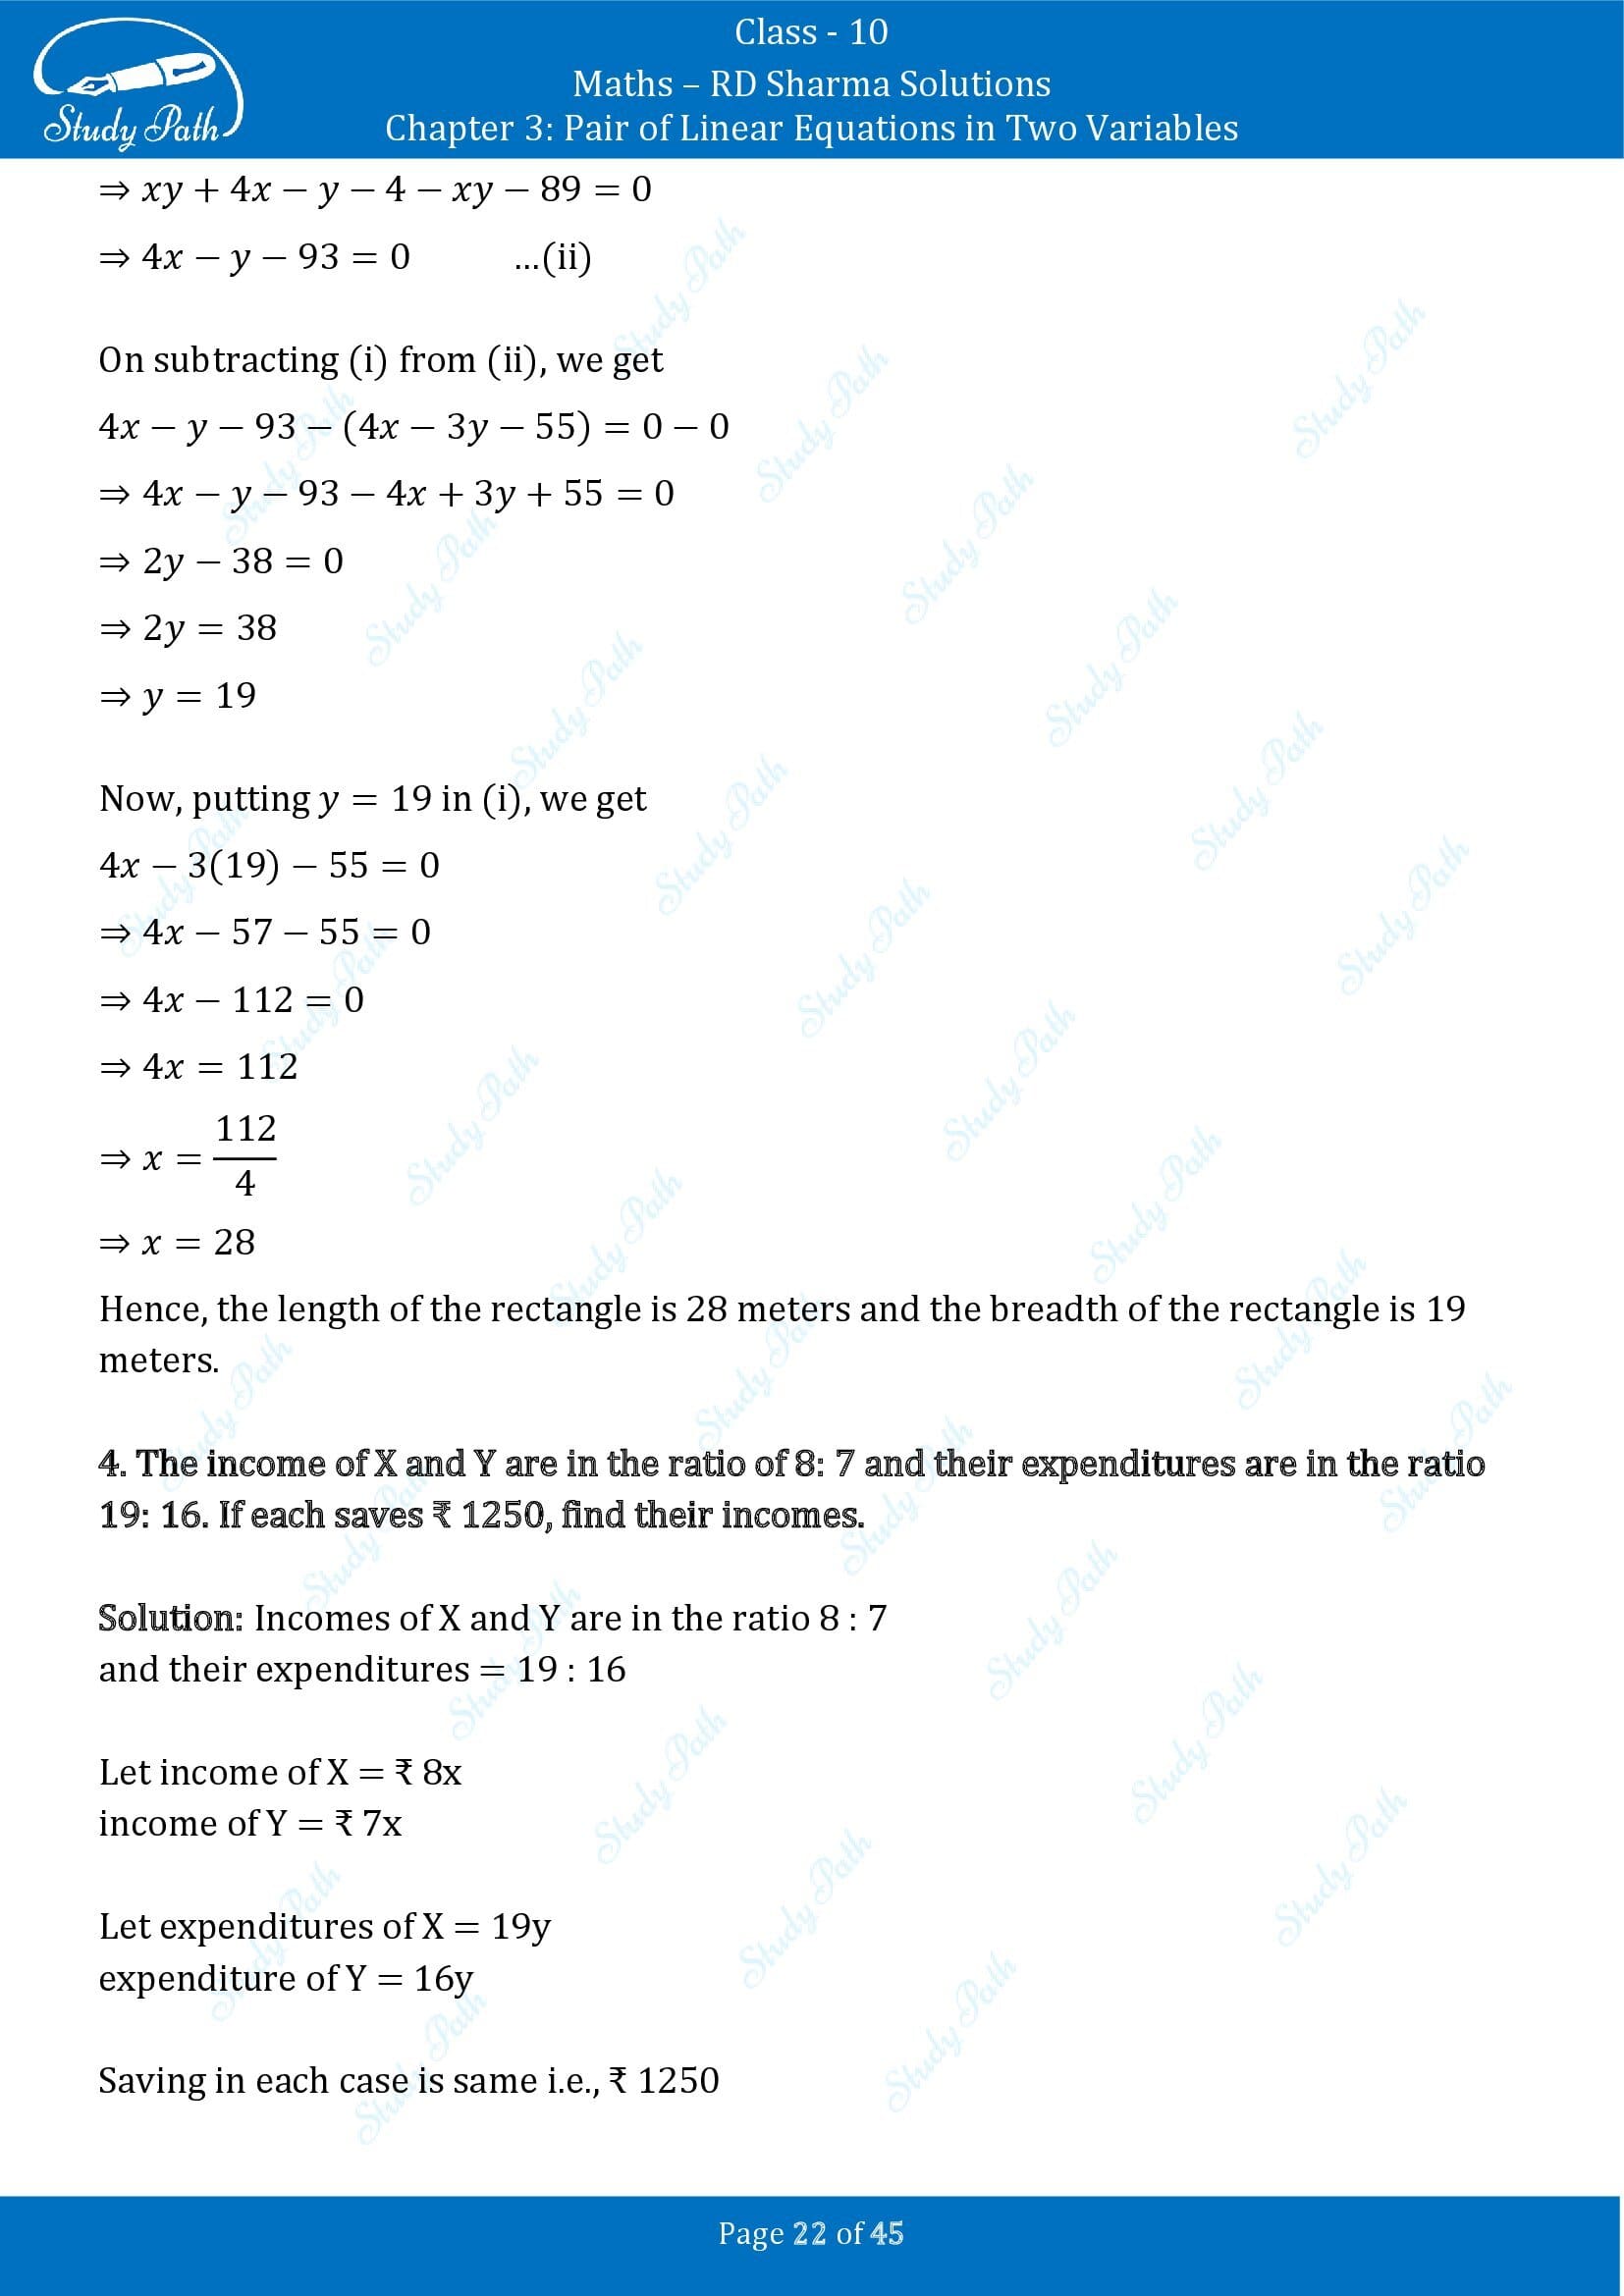 RD Sharma Solutions Class 10 Chapter 3 Pair of Linear Equations in Two Variables Exercise 3.11 00022